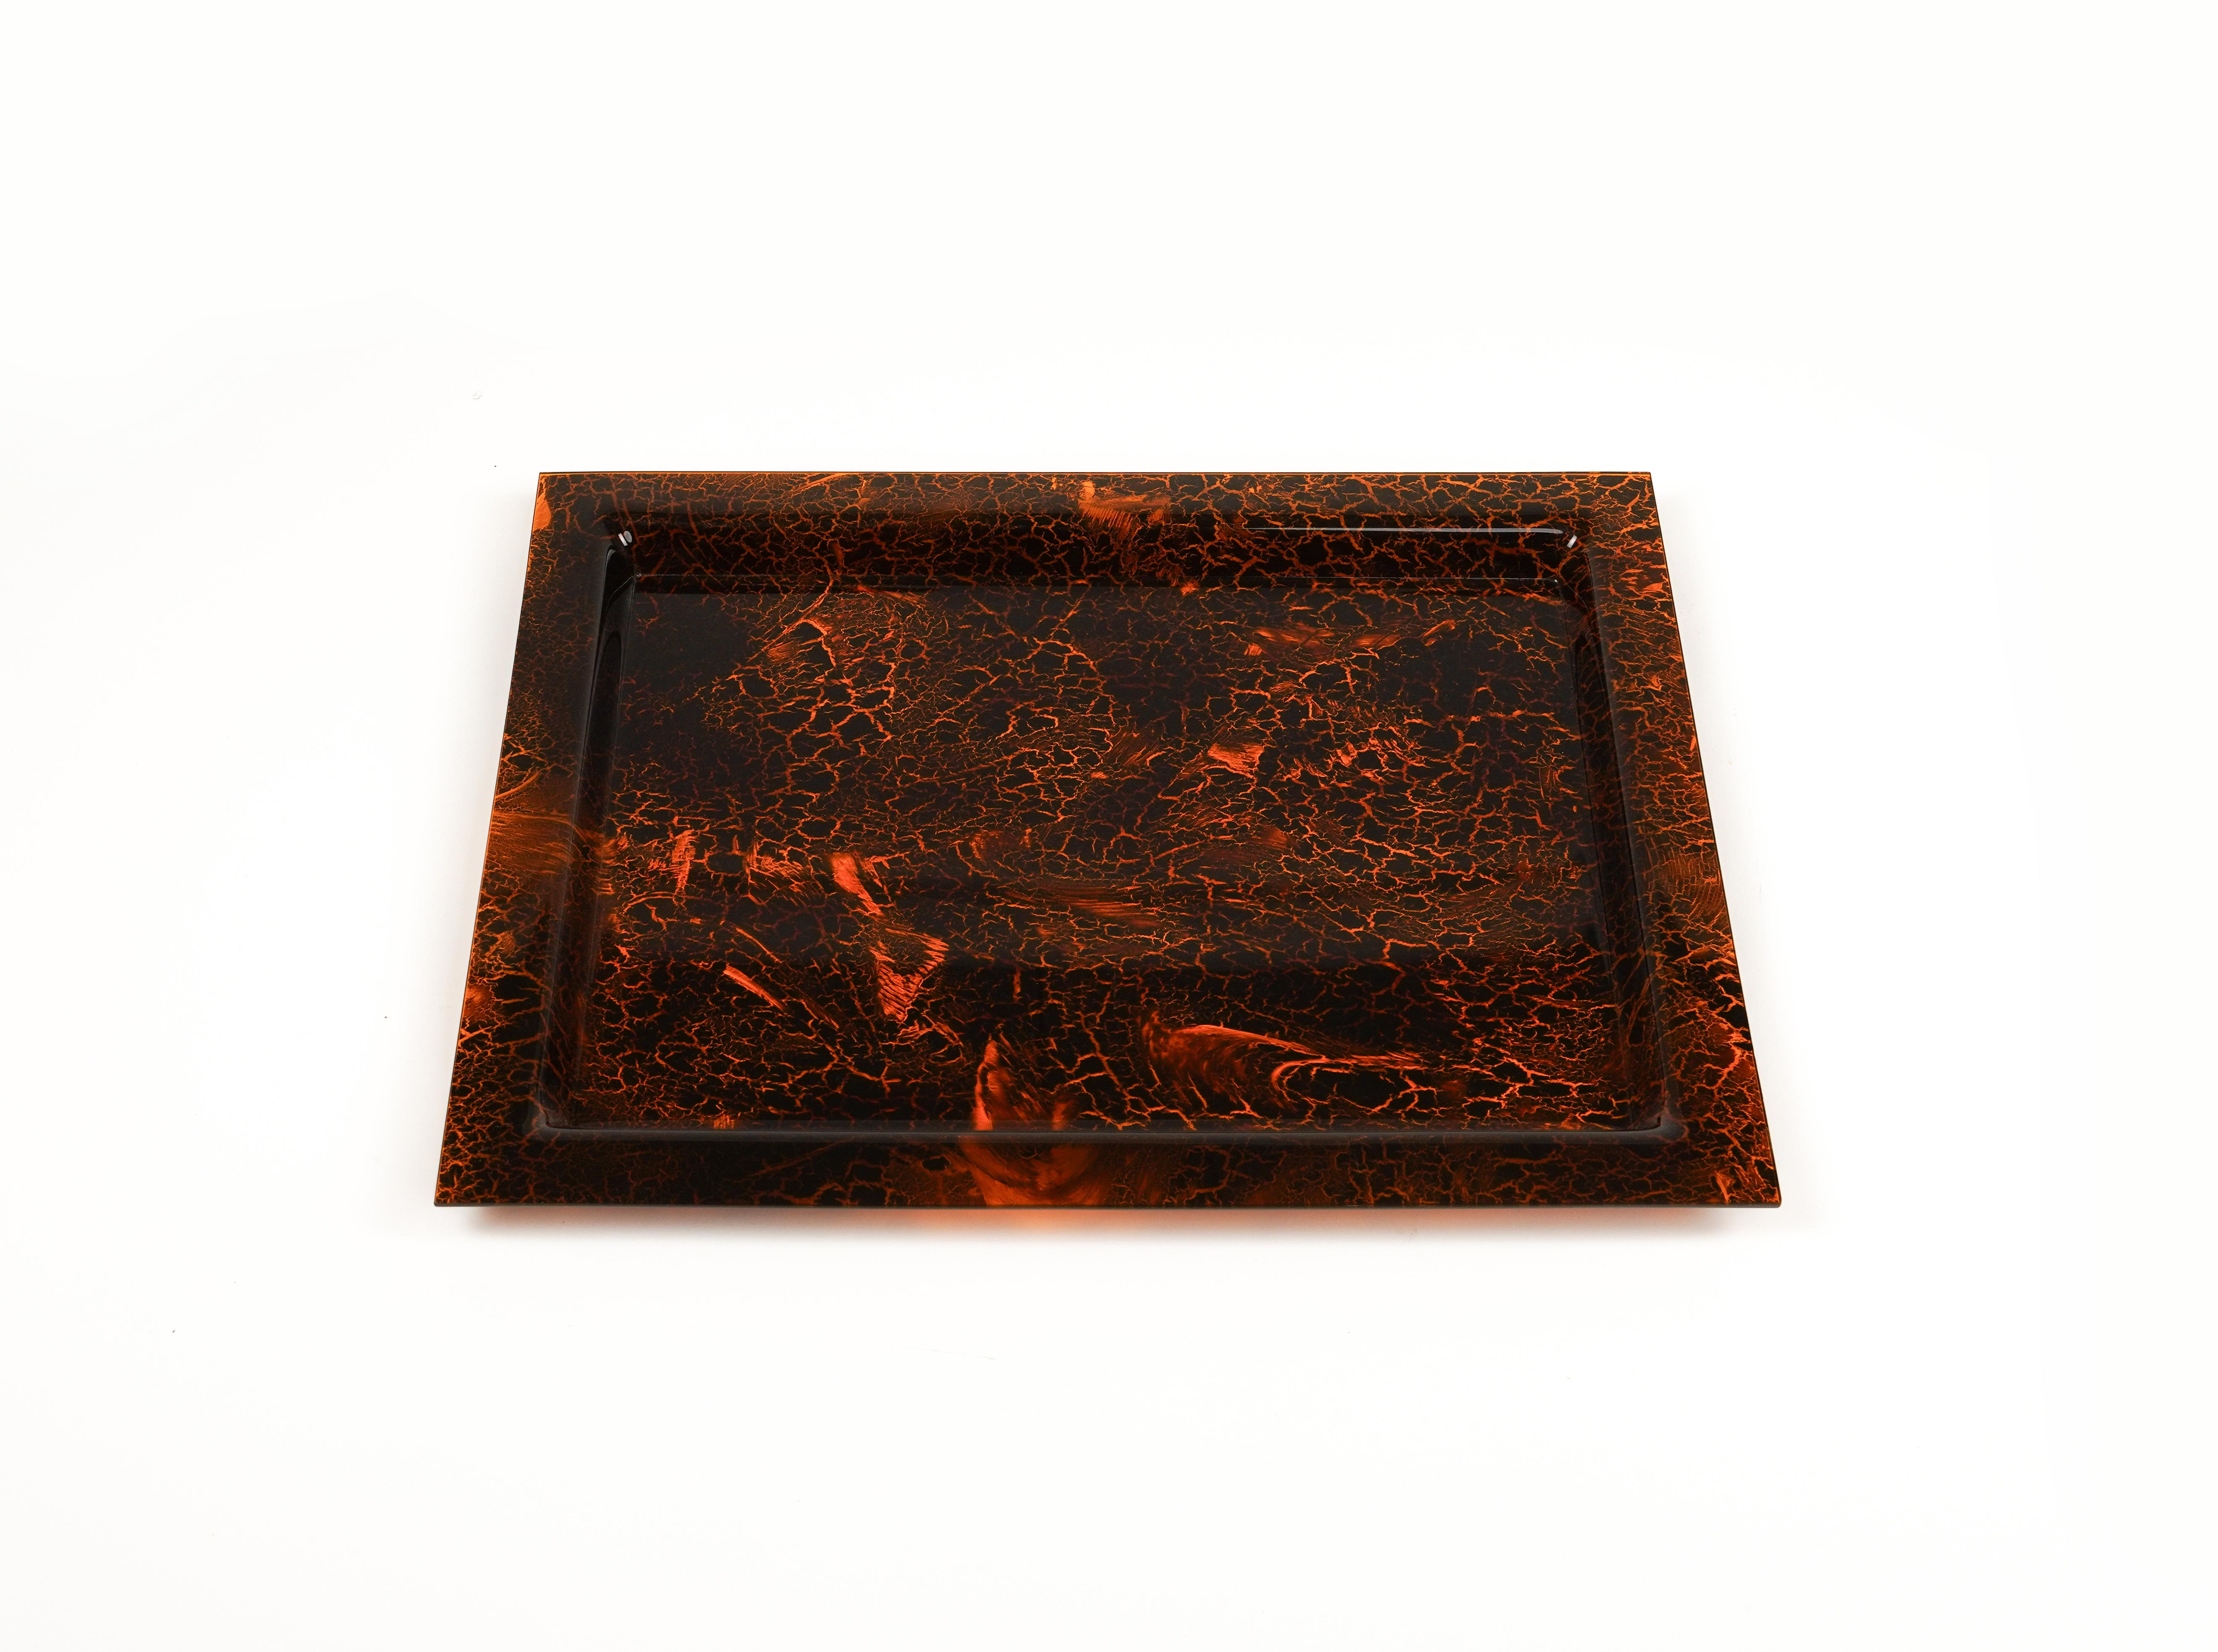 Midcentury amazing rectangular serving tray in faux tortoiseshell-effect Lucite in the style of Christian Dior Home.

Made in Italy in the 1970s.

It's an iconic tray or plate made of lucite that will wow your guests and is perfect for a mid-century